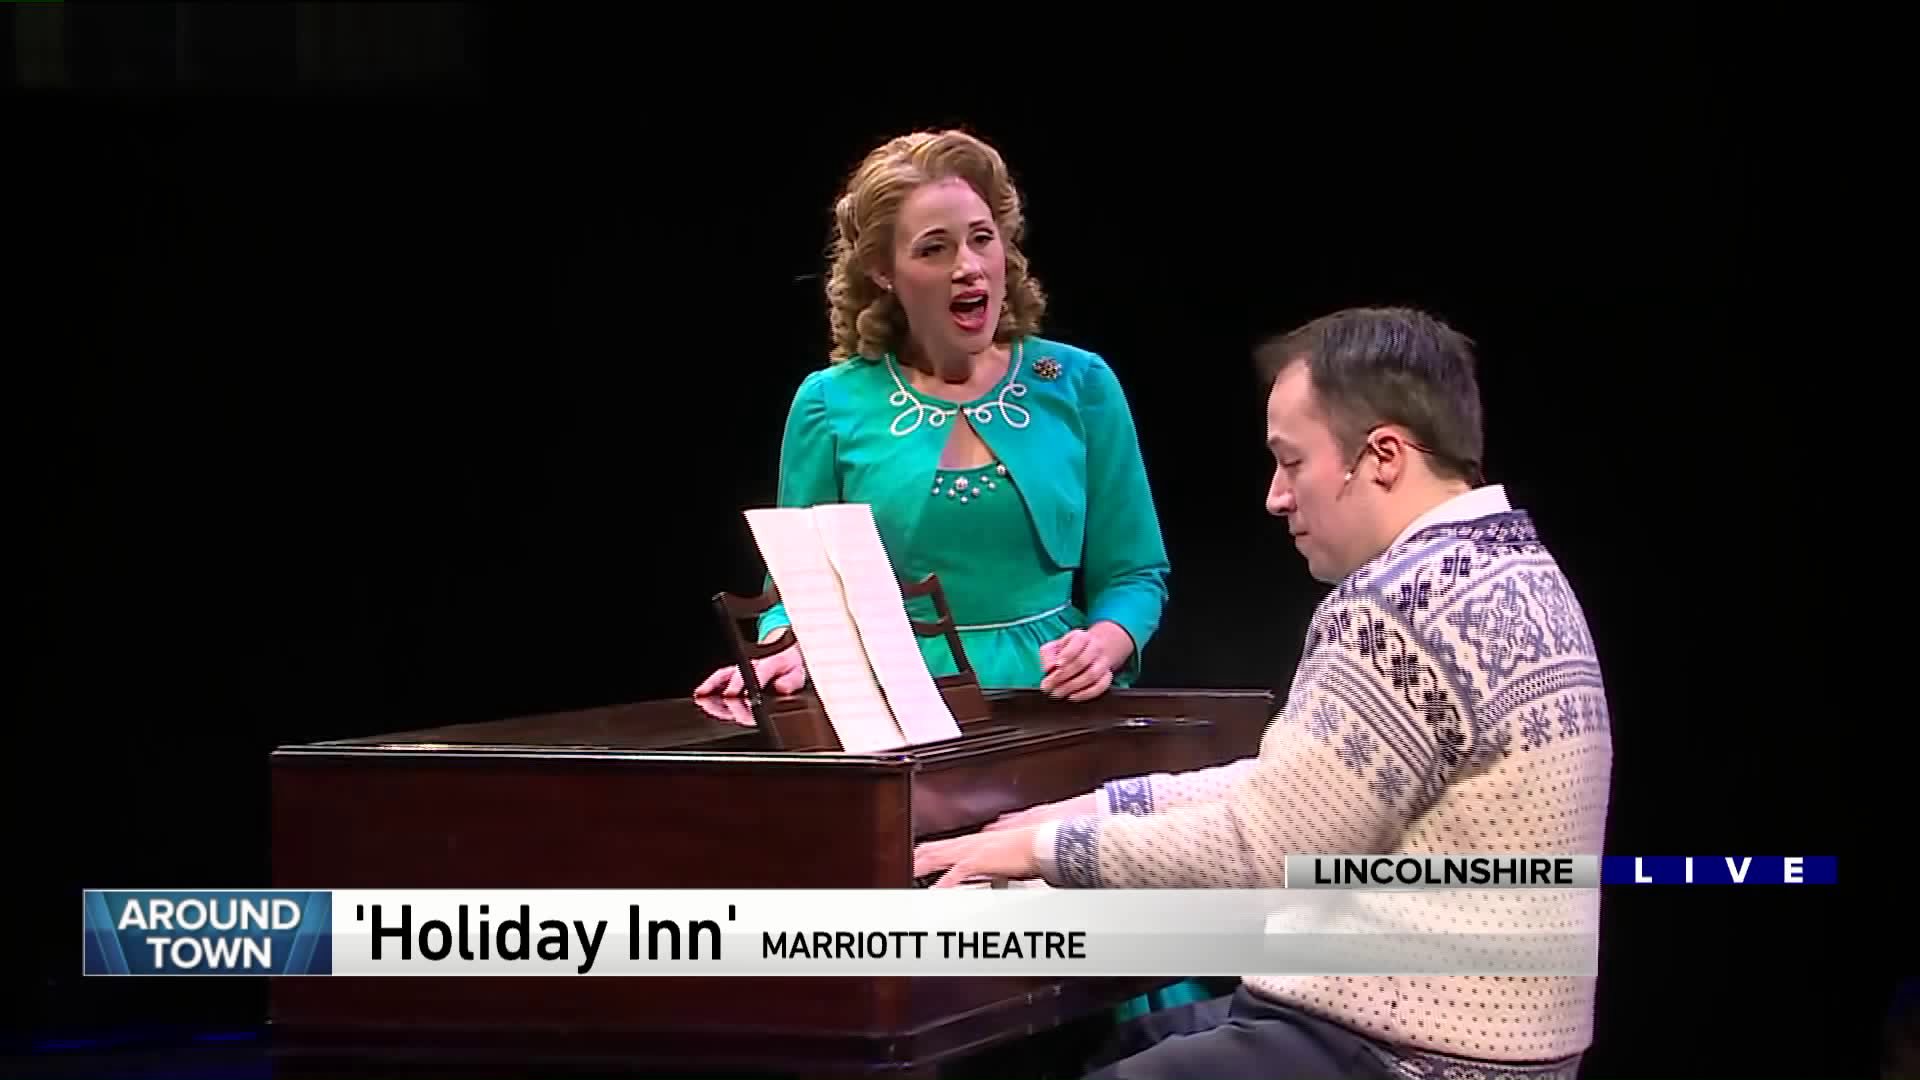 Around Town checks out ‘HOLIDAY INN’ at Marriott Theatre